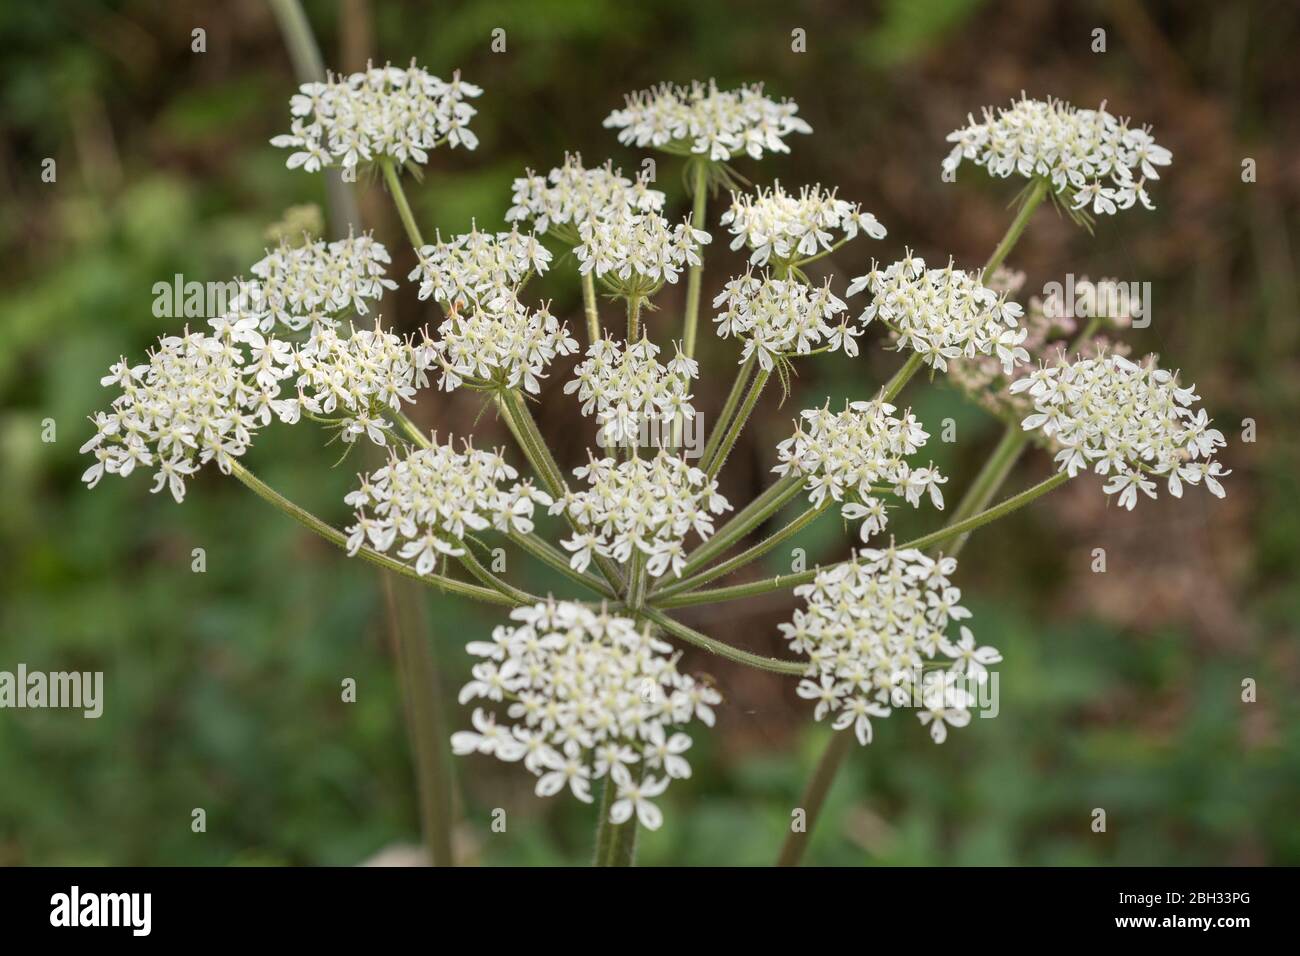 Hogweed / Cow Parsnip - Heracleum sphondylium - showing Umbellifer flower cluster shape. The plant sap has a bad reputation for blistering skin. Stock Photo